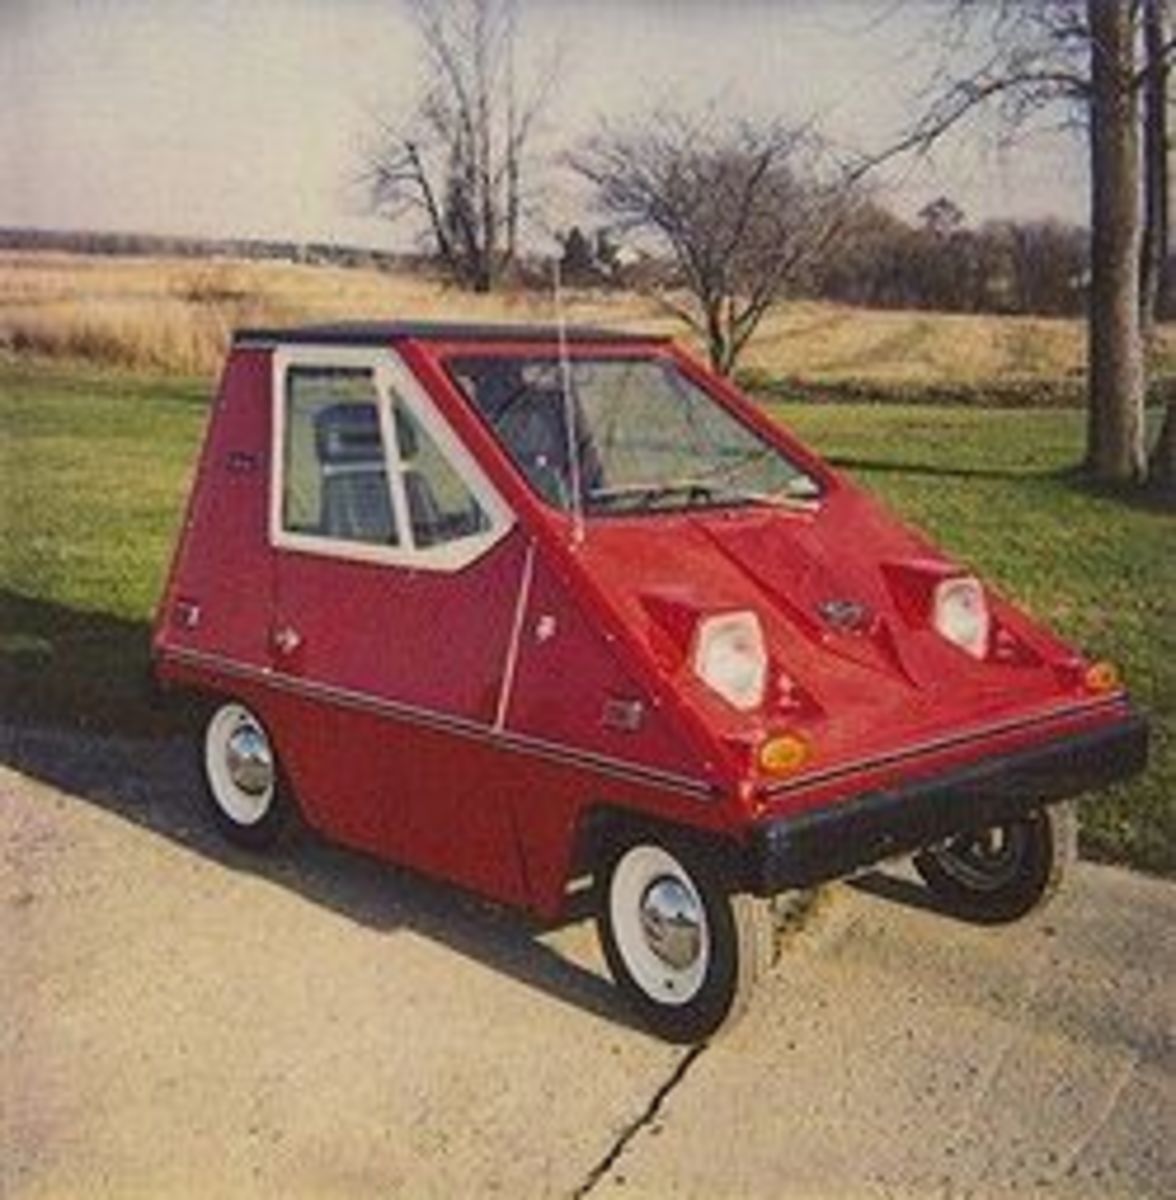 The tiny CitiCar was the first mass-produced electric vehicle in the U.S.